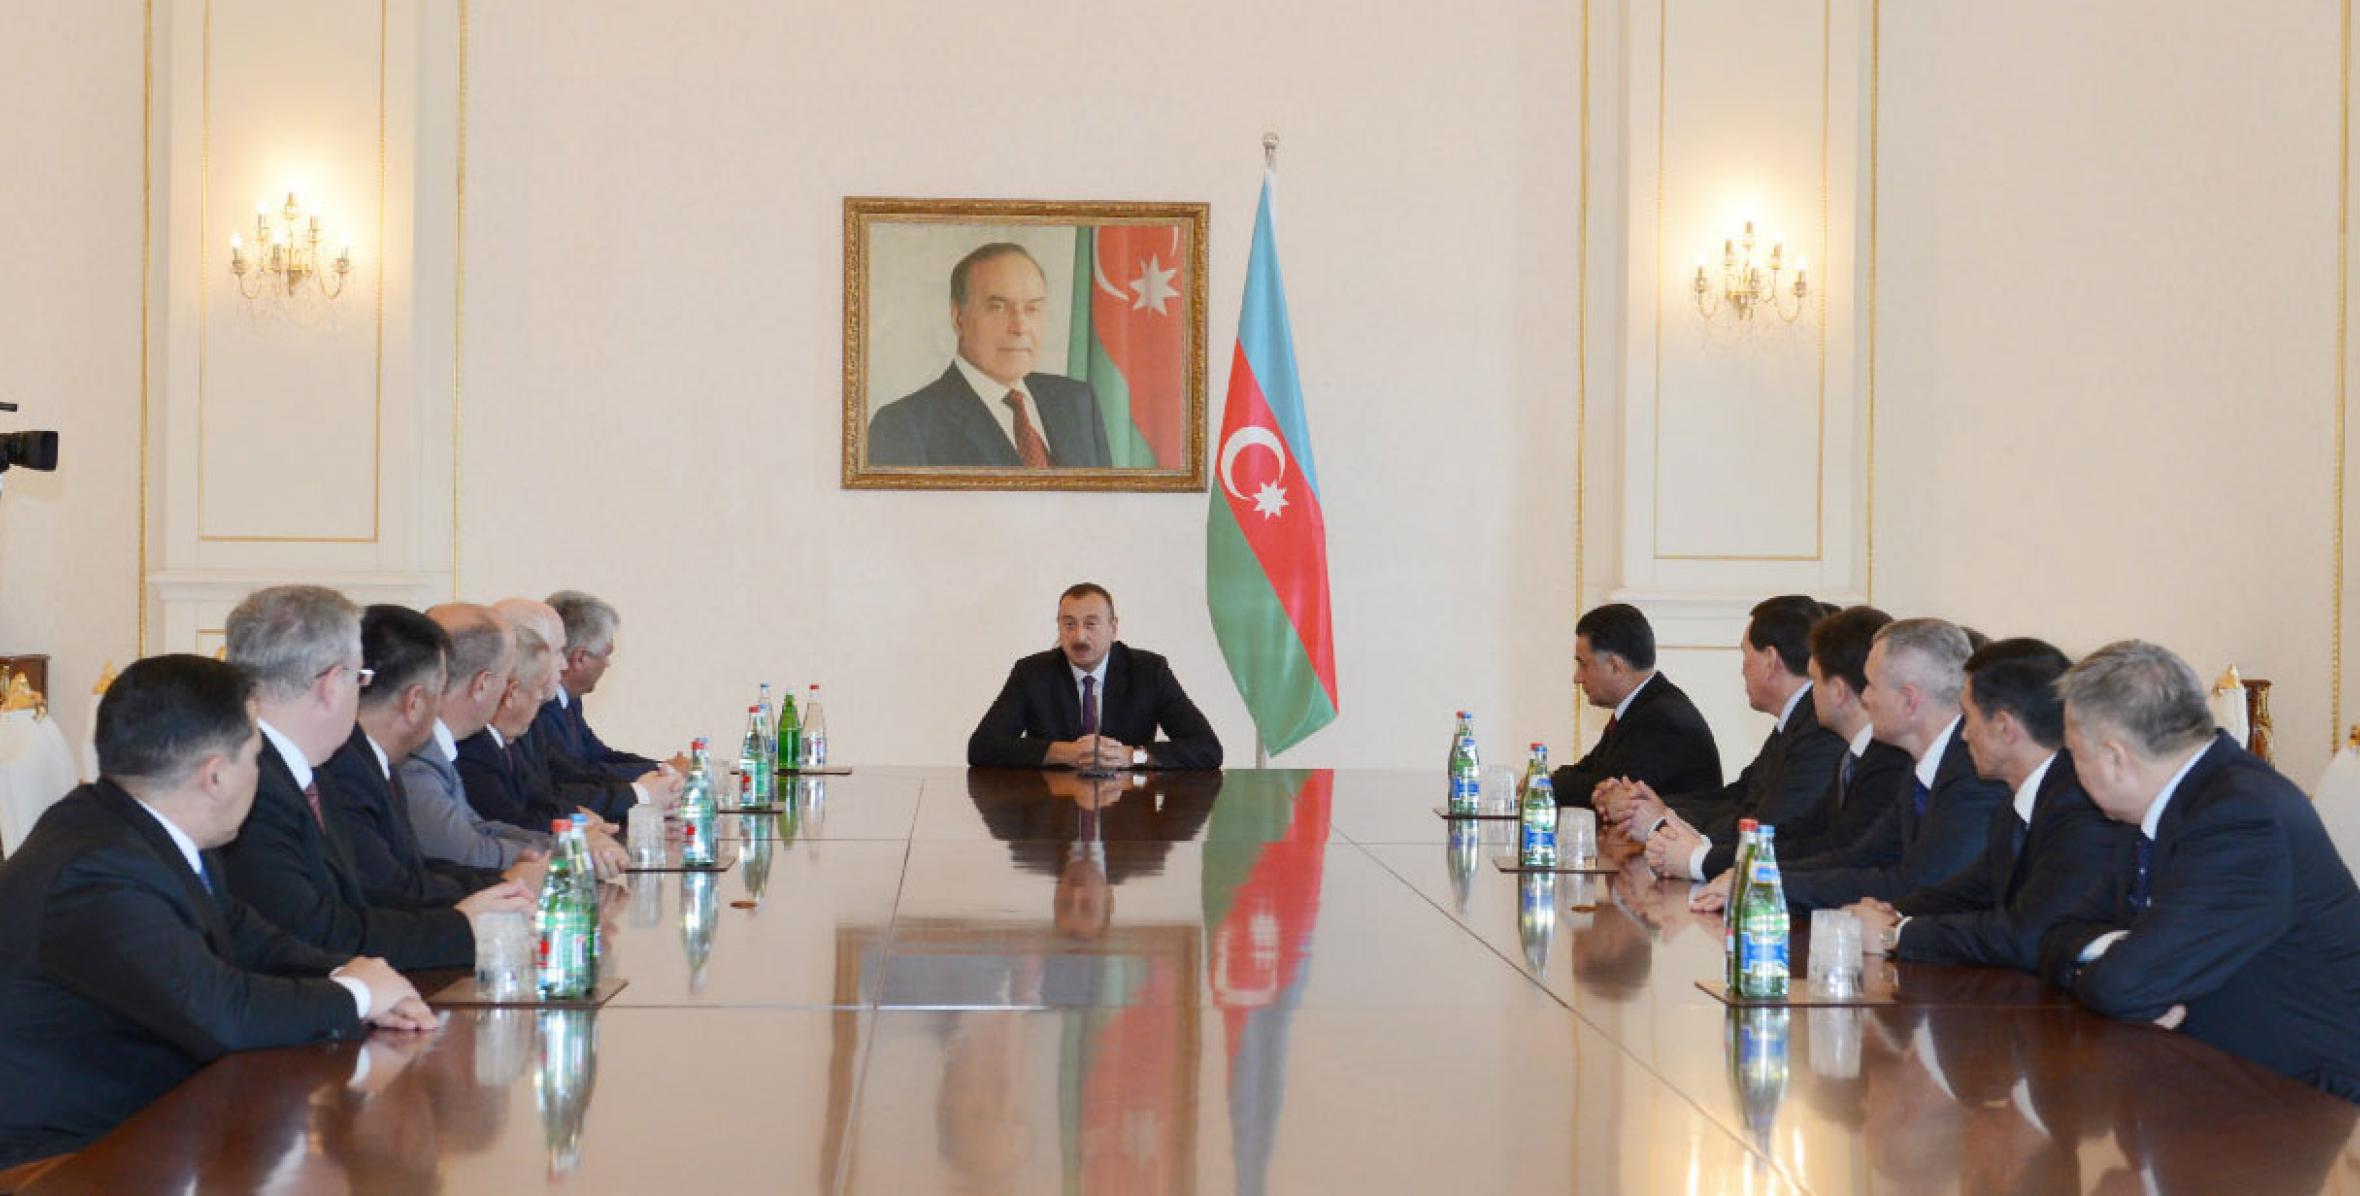 Ilham Aliyev received the participants of the Council of CIS Interior Ministers meeting under way in Baku